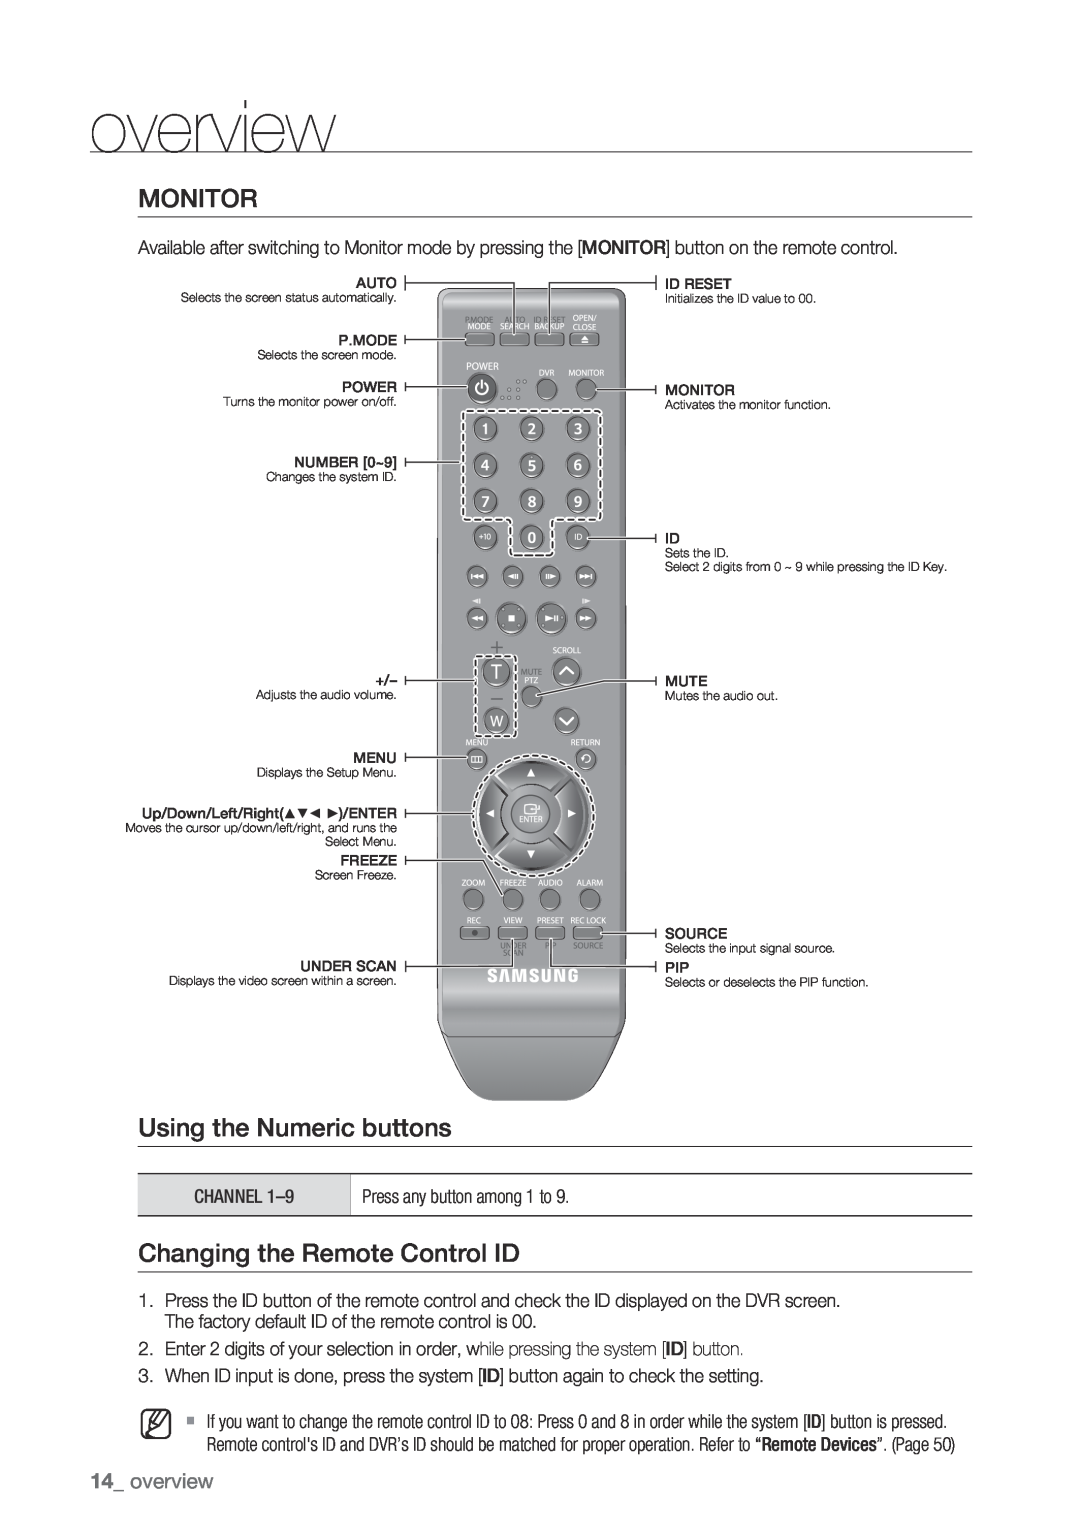 Samsung 870D, 1670D, 1650D, SRD-850D, SRD-830 Monitor, Using the Numeric buttons, Changing the Remote Control ID, overview 